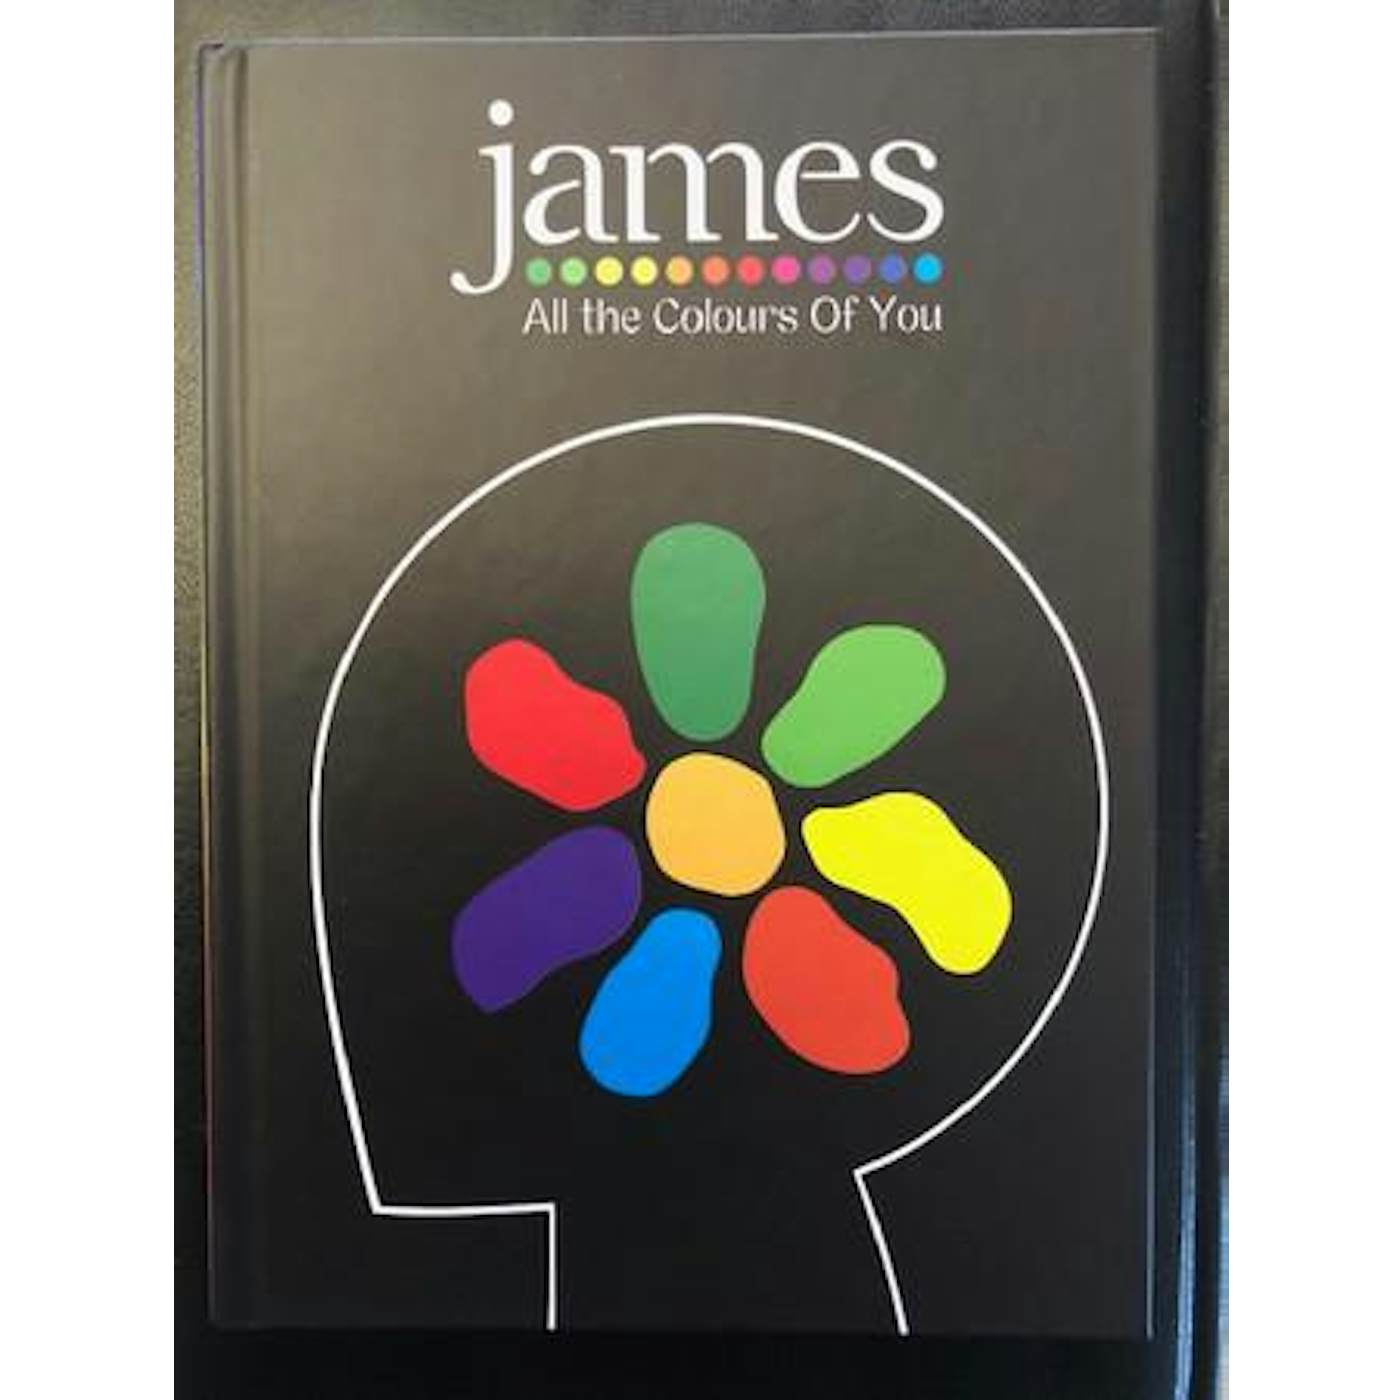 James ALL THE COLOURS OF YOU (DELUXE EDITION) CD